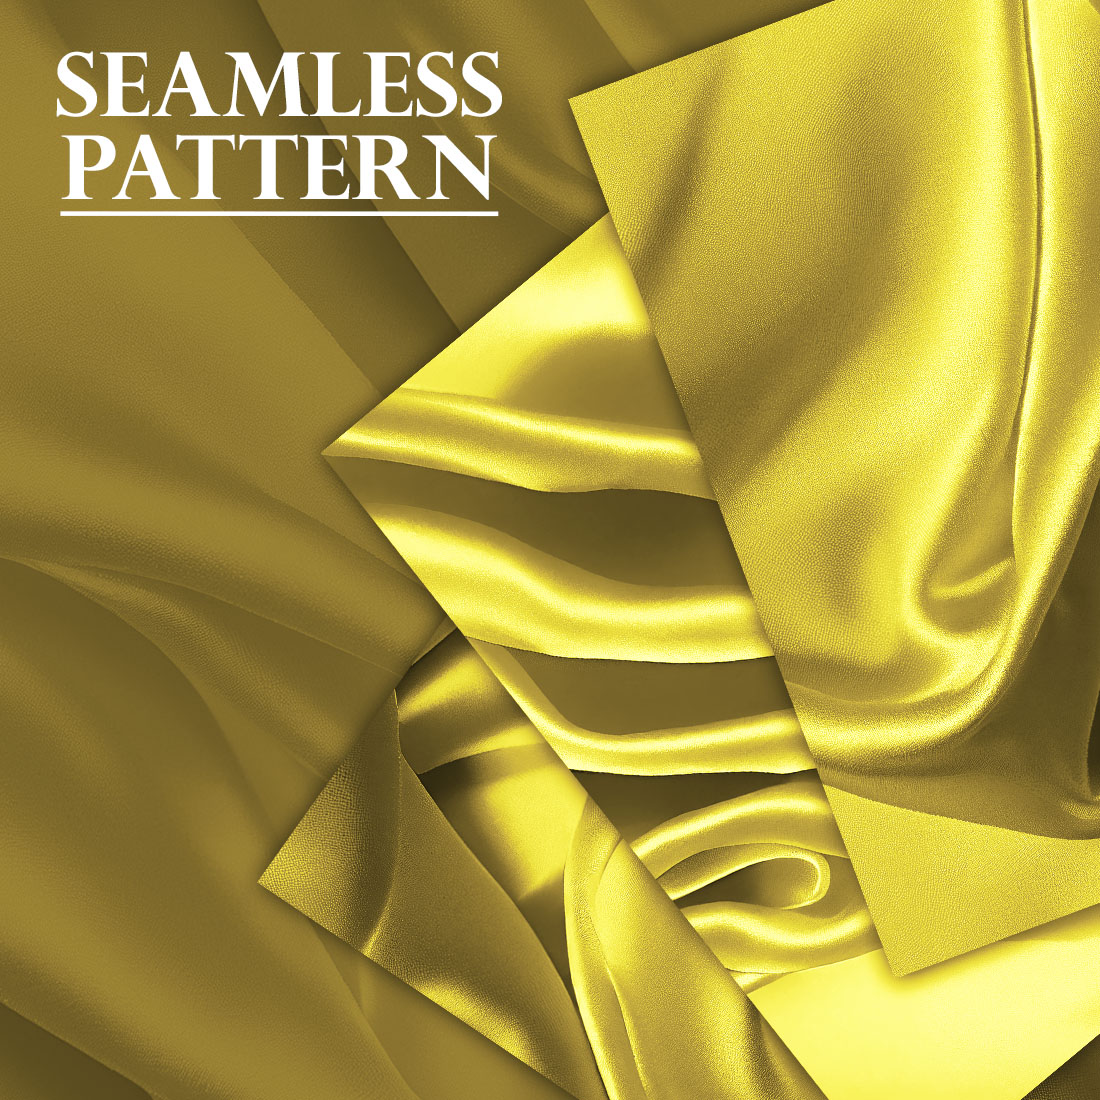 A selection of images with colorful patterns of yellow silk.